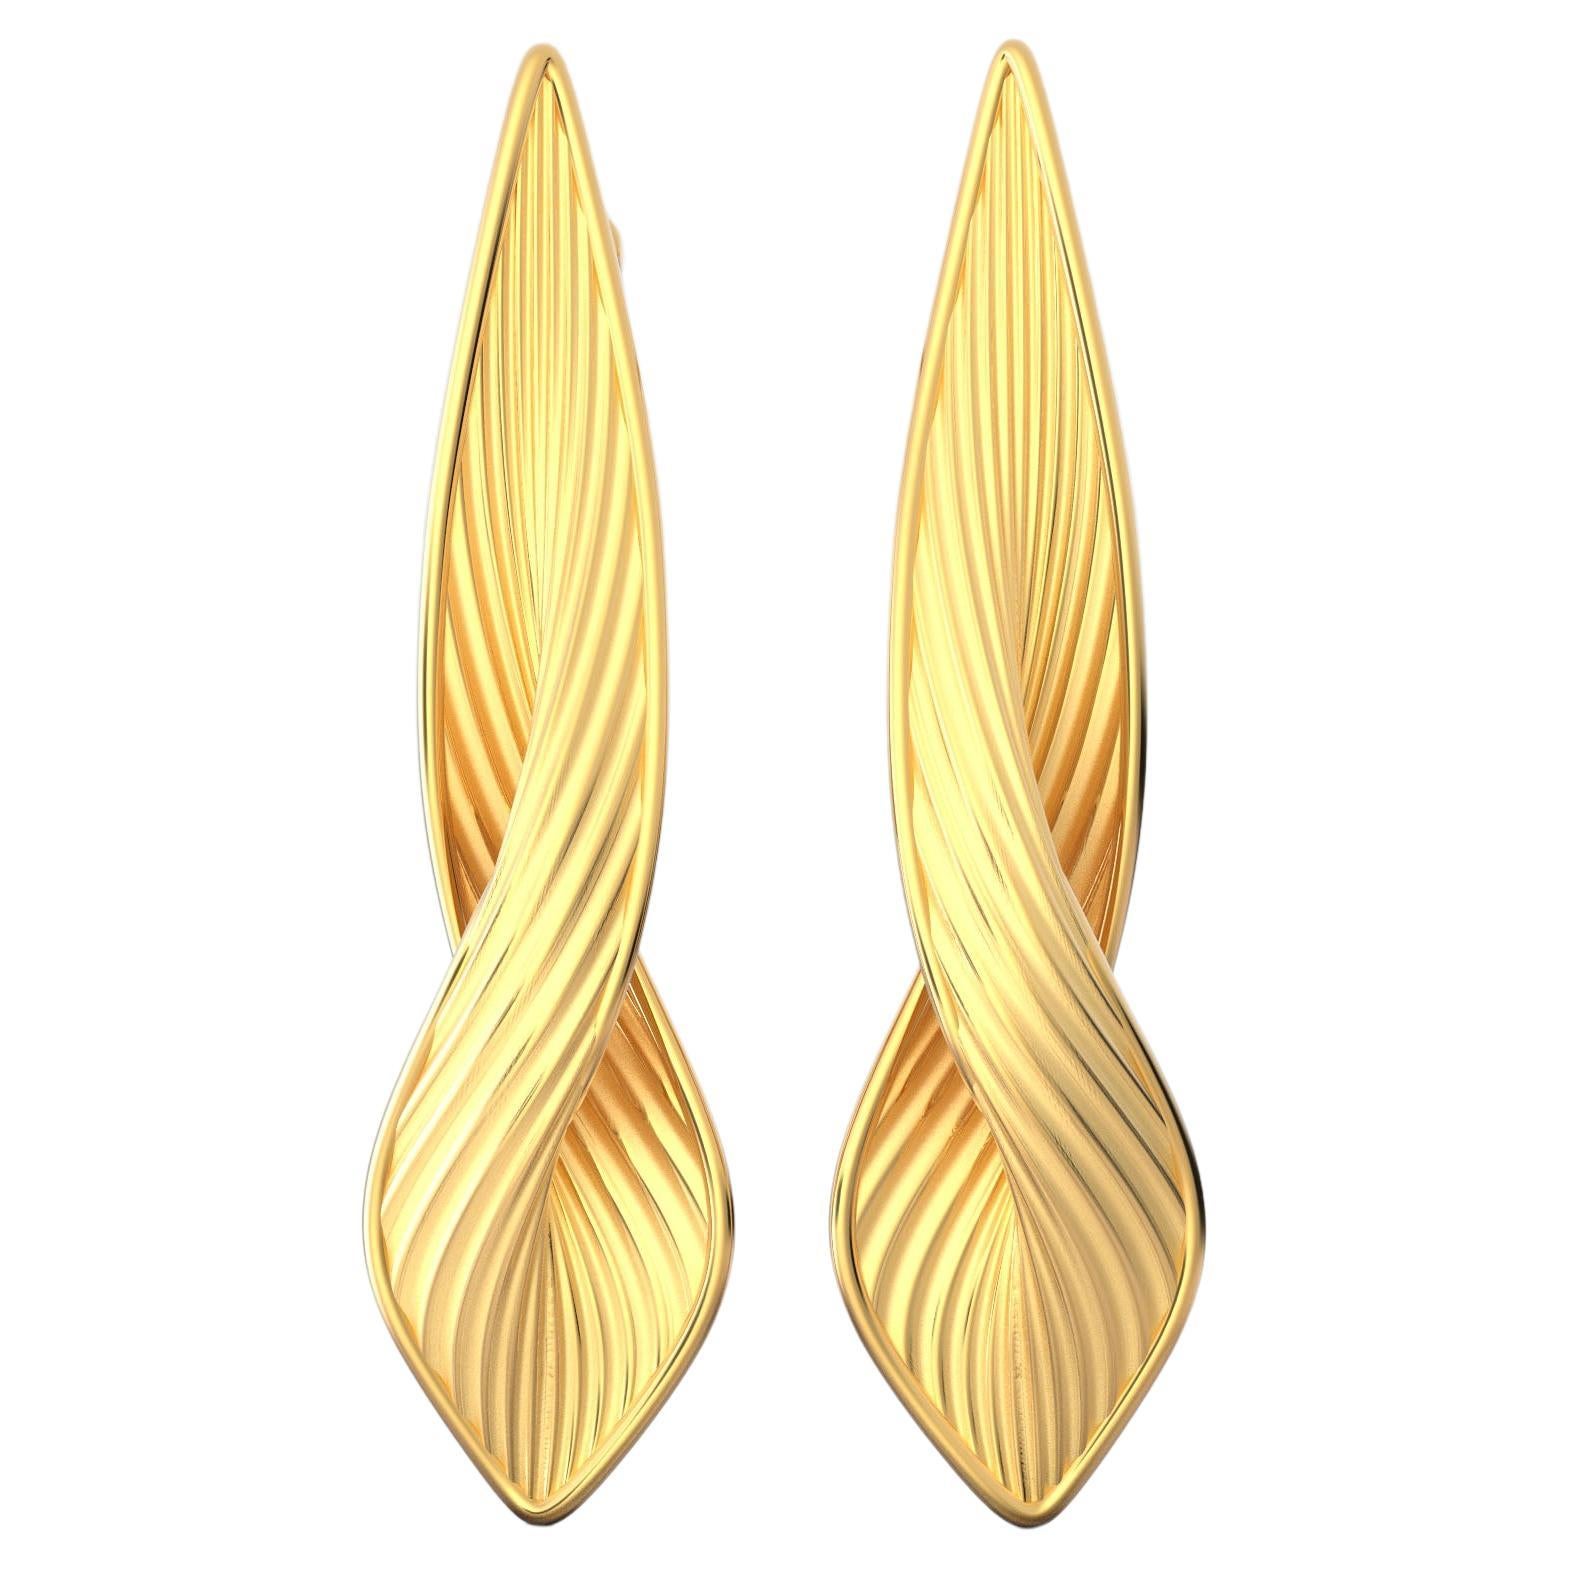 Made to order Contemporary Statement Earrings in solid gold 14k,  Italian fine jewelry made in Italy, long stud earring, modern and elegant earrings.
Earring length: 52 Millimeters; Width: 13 Millimeters
Available in yellow gold, rose gold and white